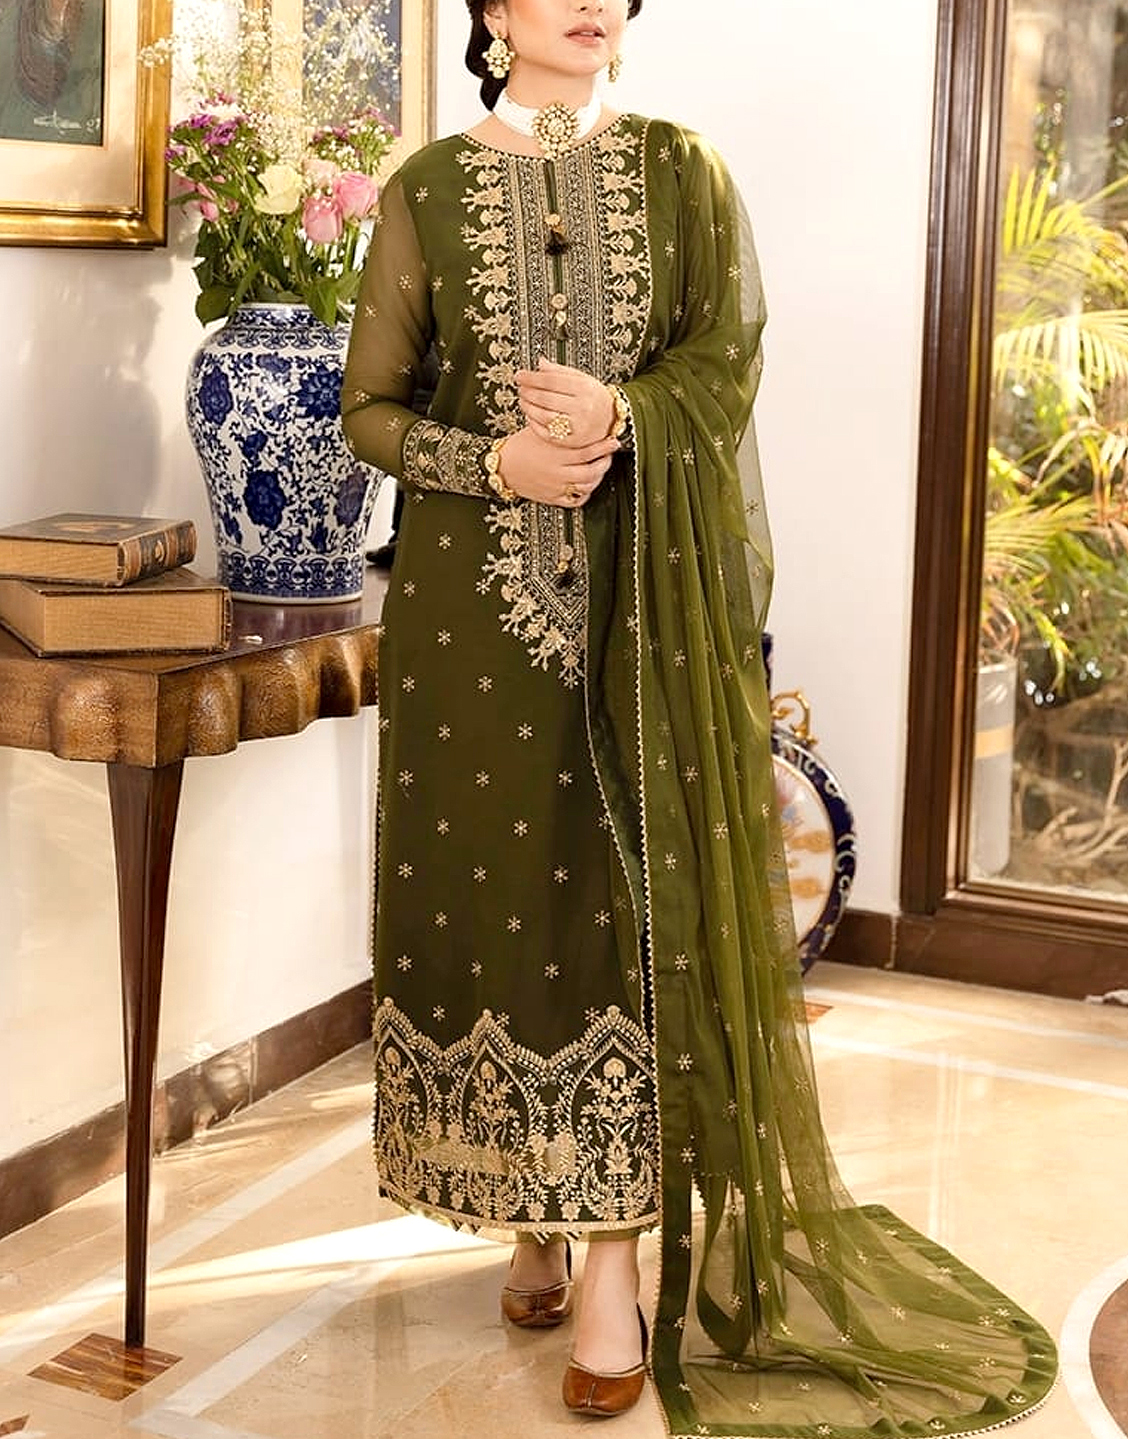 https://www.pakstyle.pk/img/products/l/p16608-embroidered-chiffon-party-dress.jpg